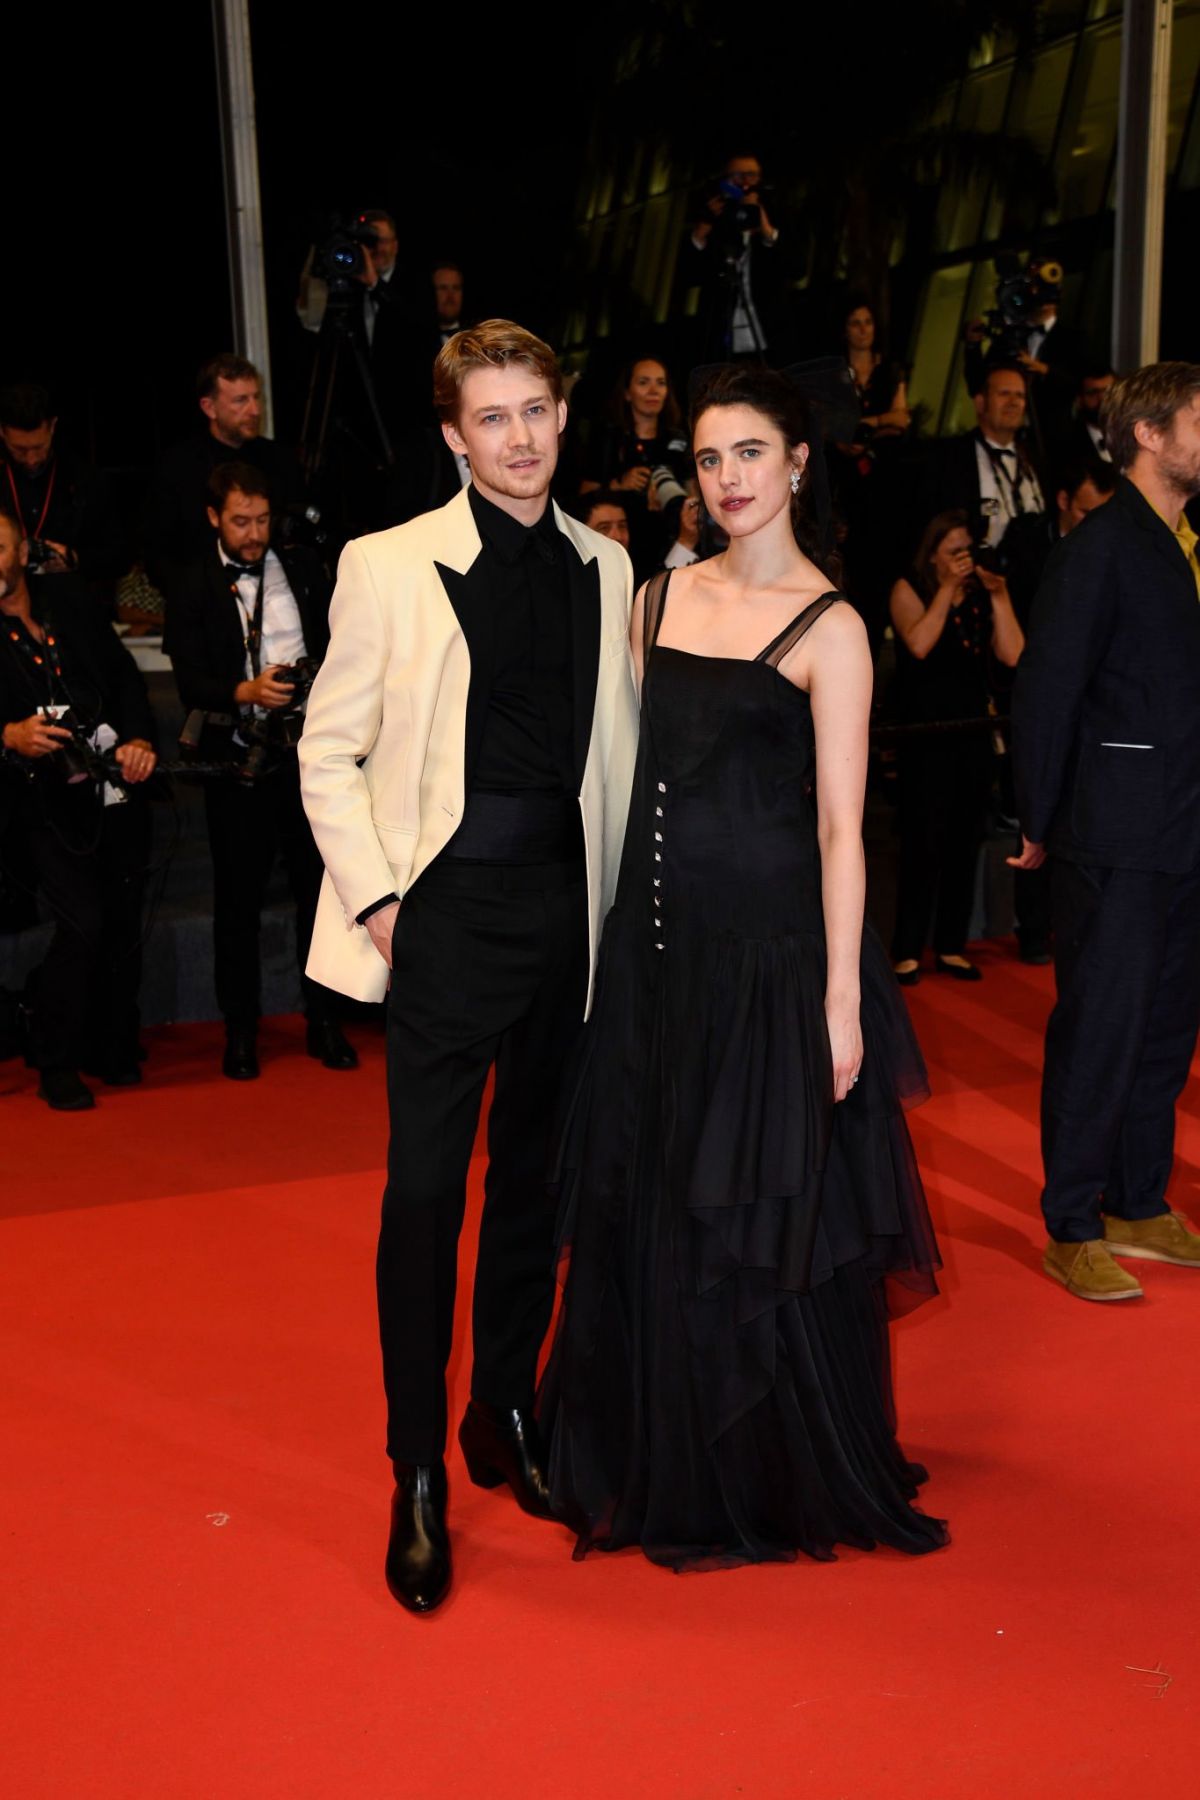 MARGARET QUALLEY and Joe Alwyn at Stars at Noon Premiere at 75th Annual